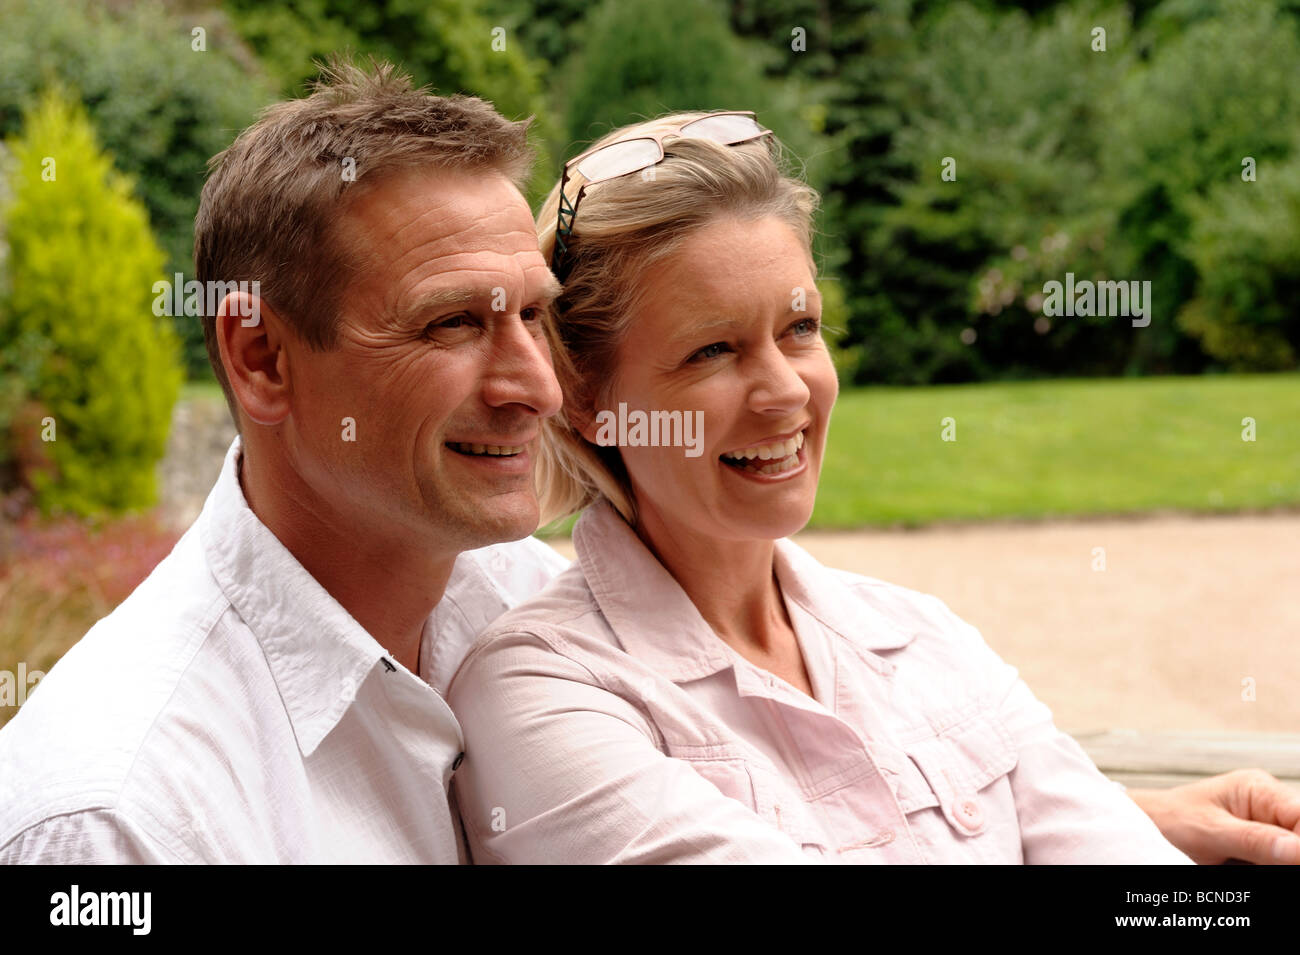 Man and woman outside Stock Photo